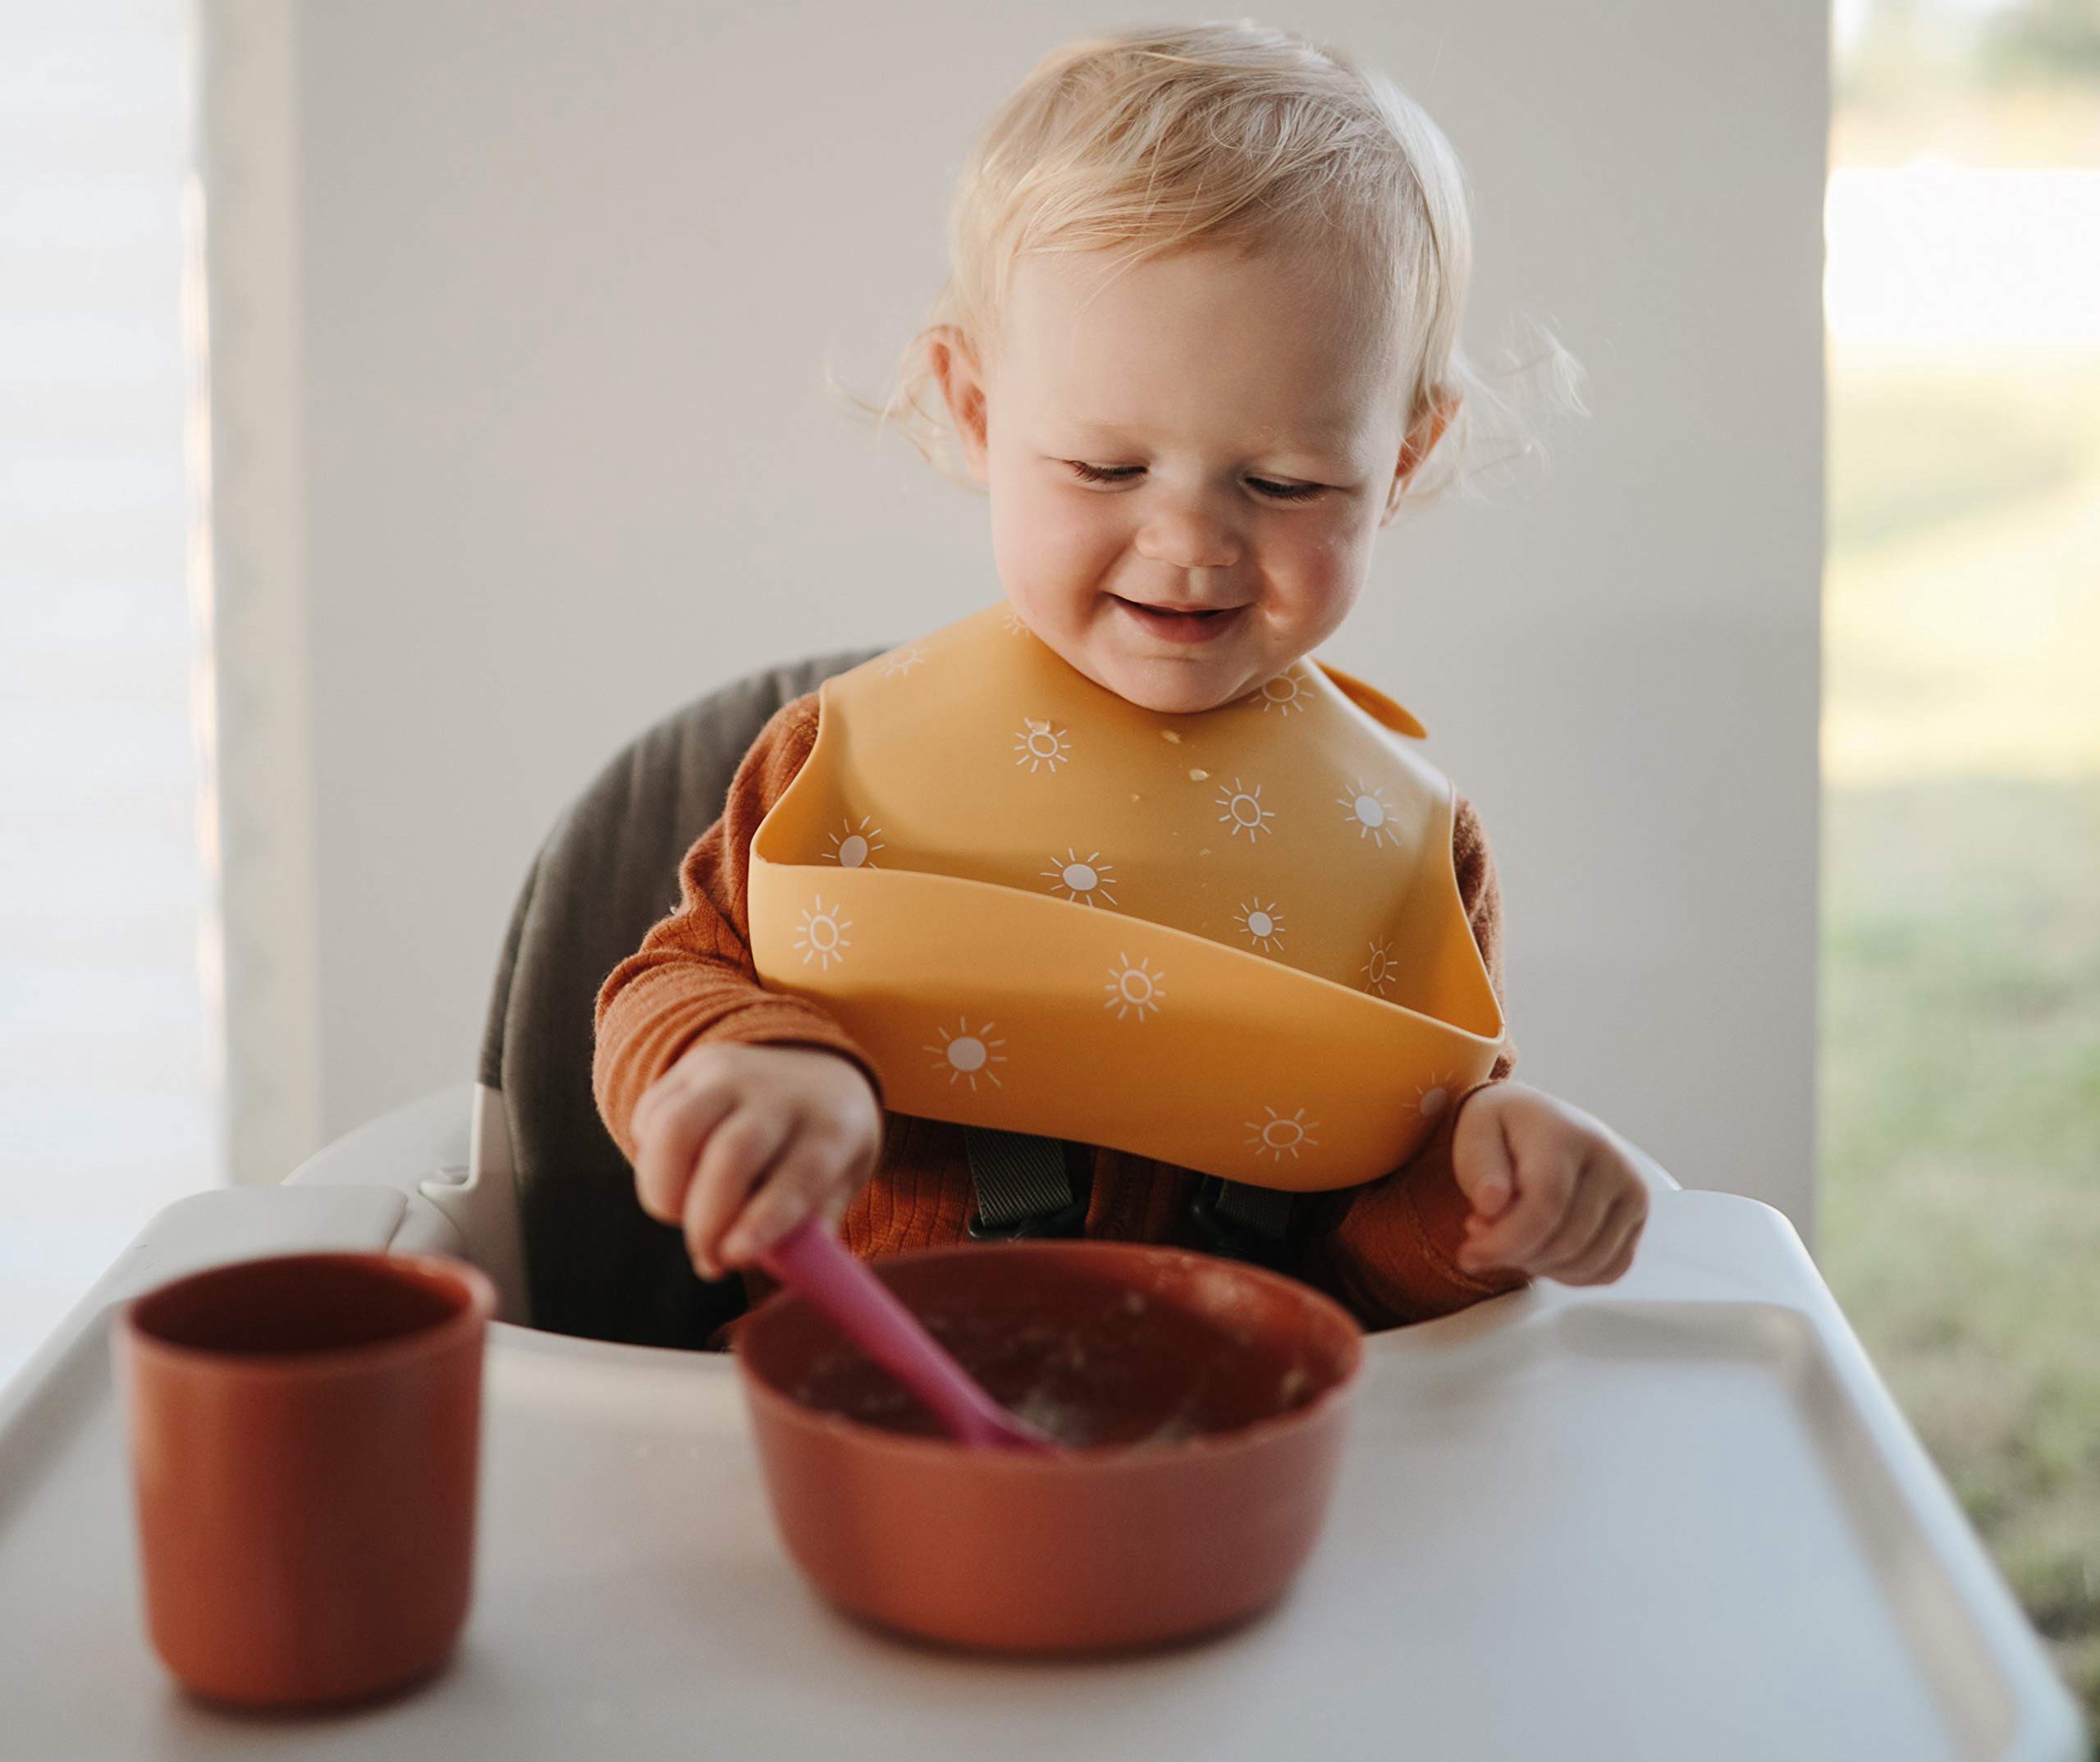 Silicone Baby Bib Review: A Must-Have for Mess-Free Feeding